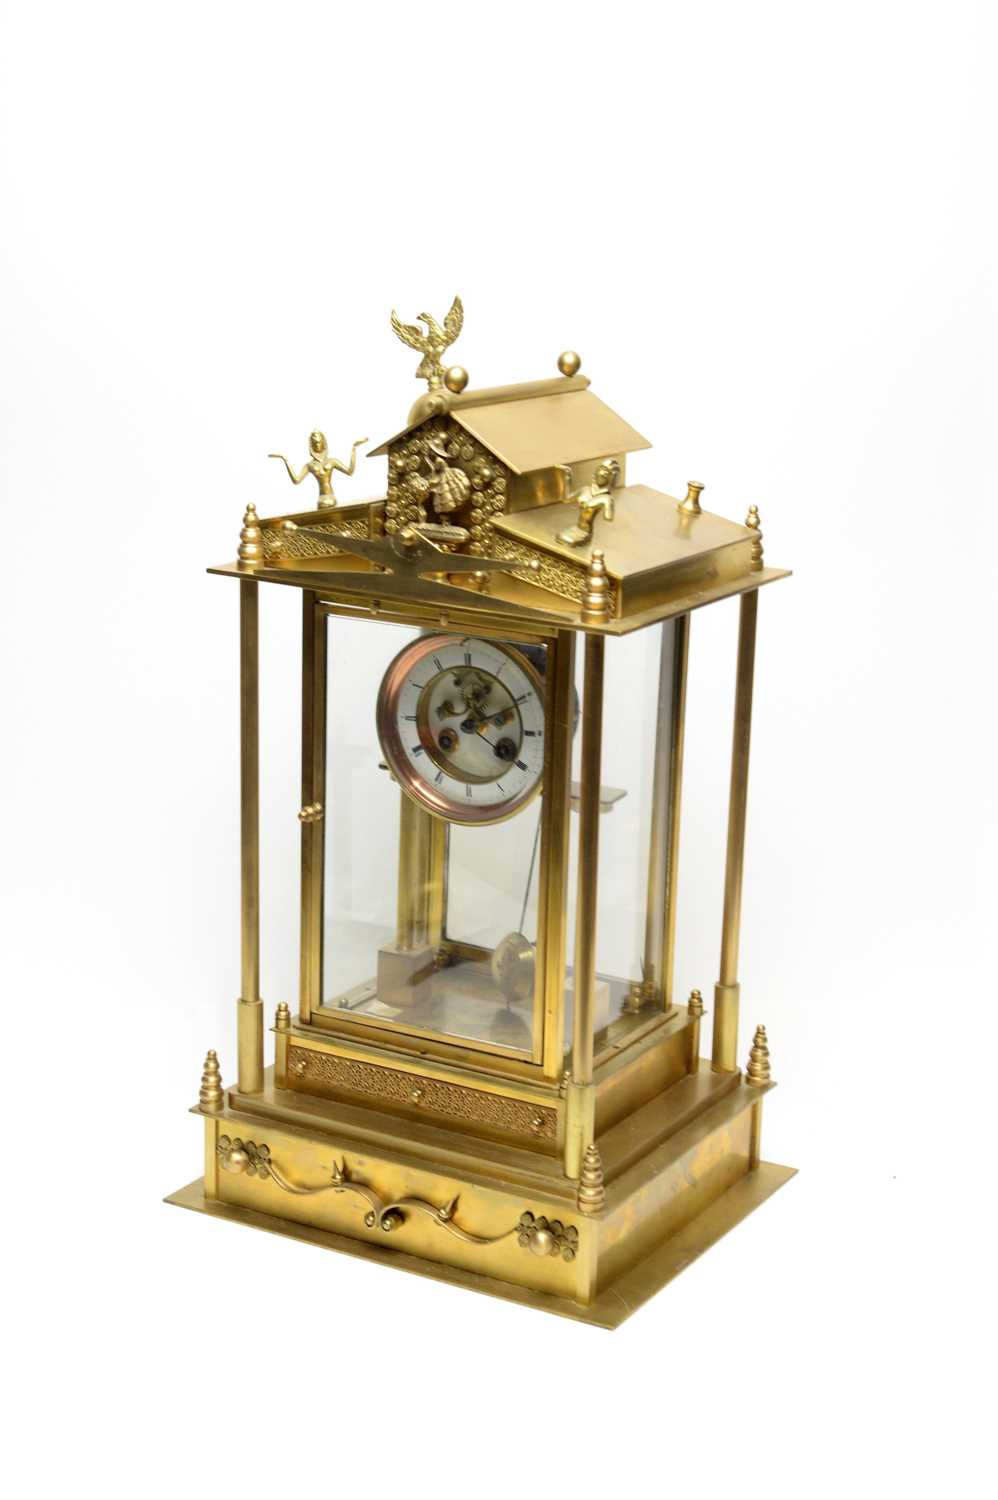 S Marti & Cie: a large and impressive French gilt four-glass mantel clock - Image 2 of 15